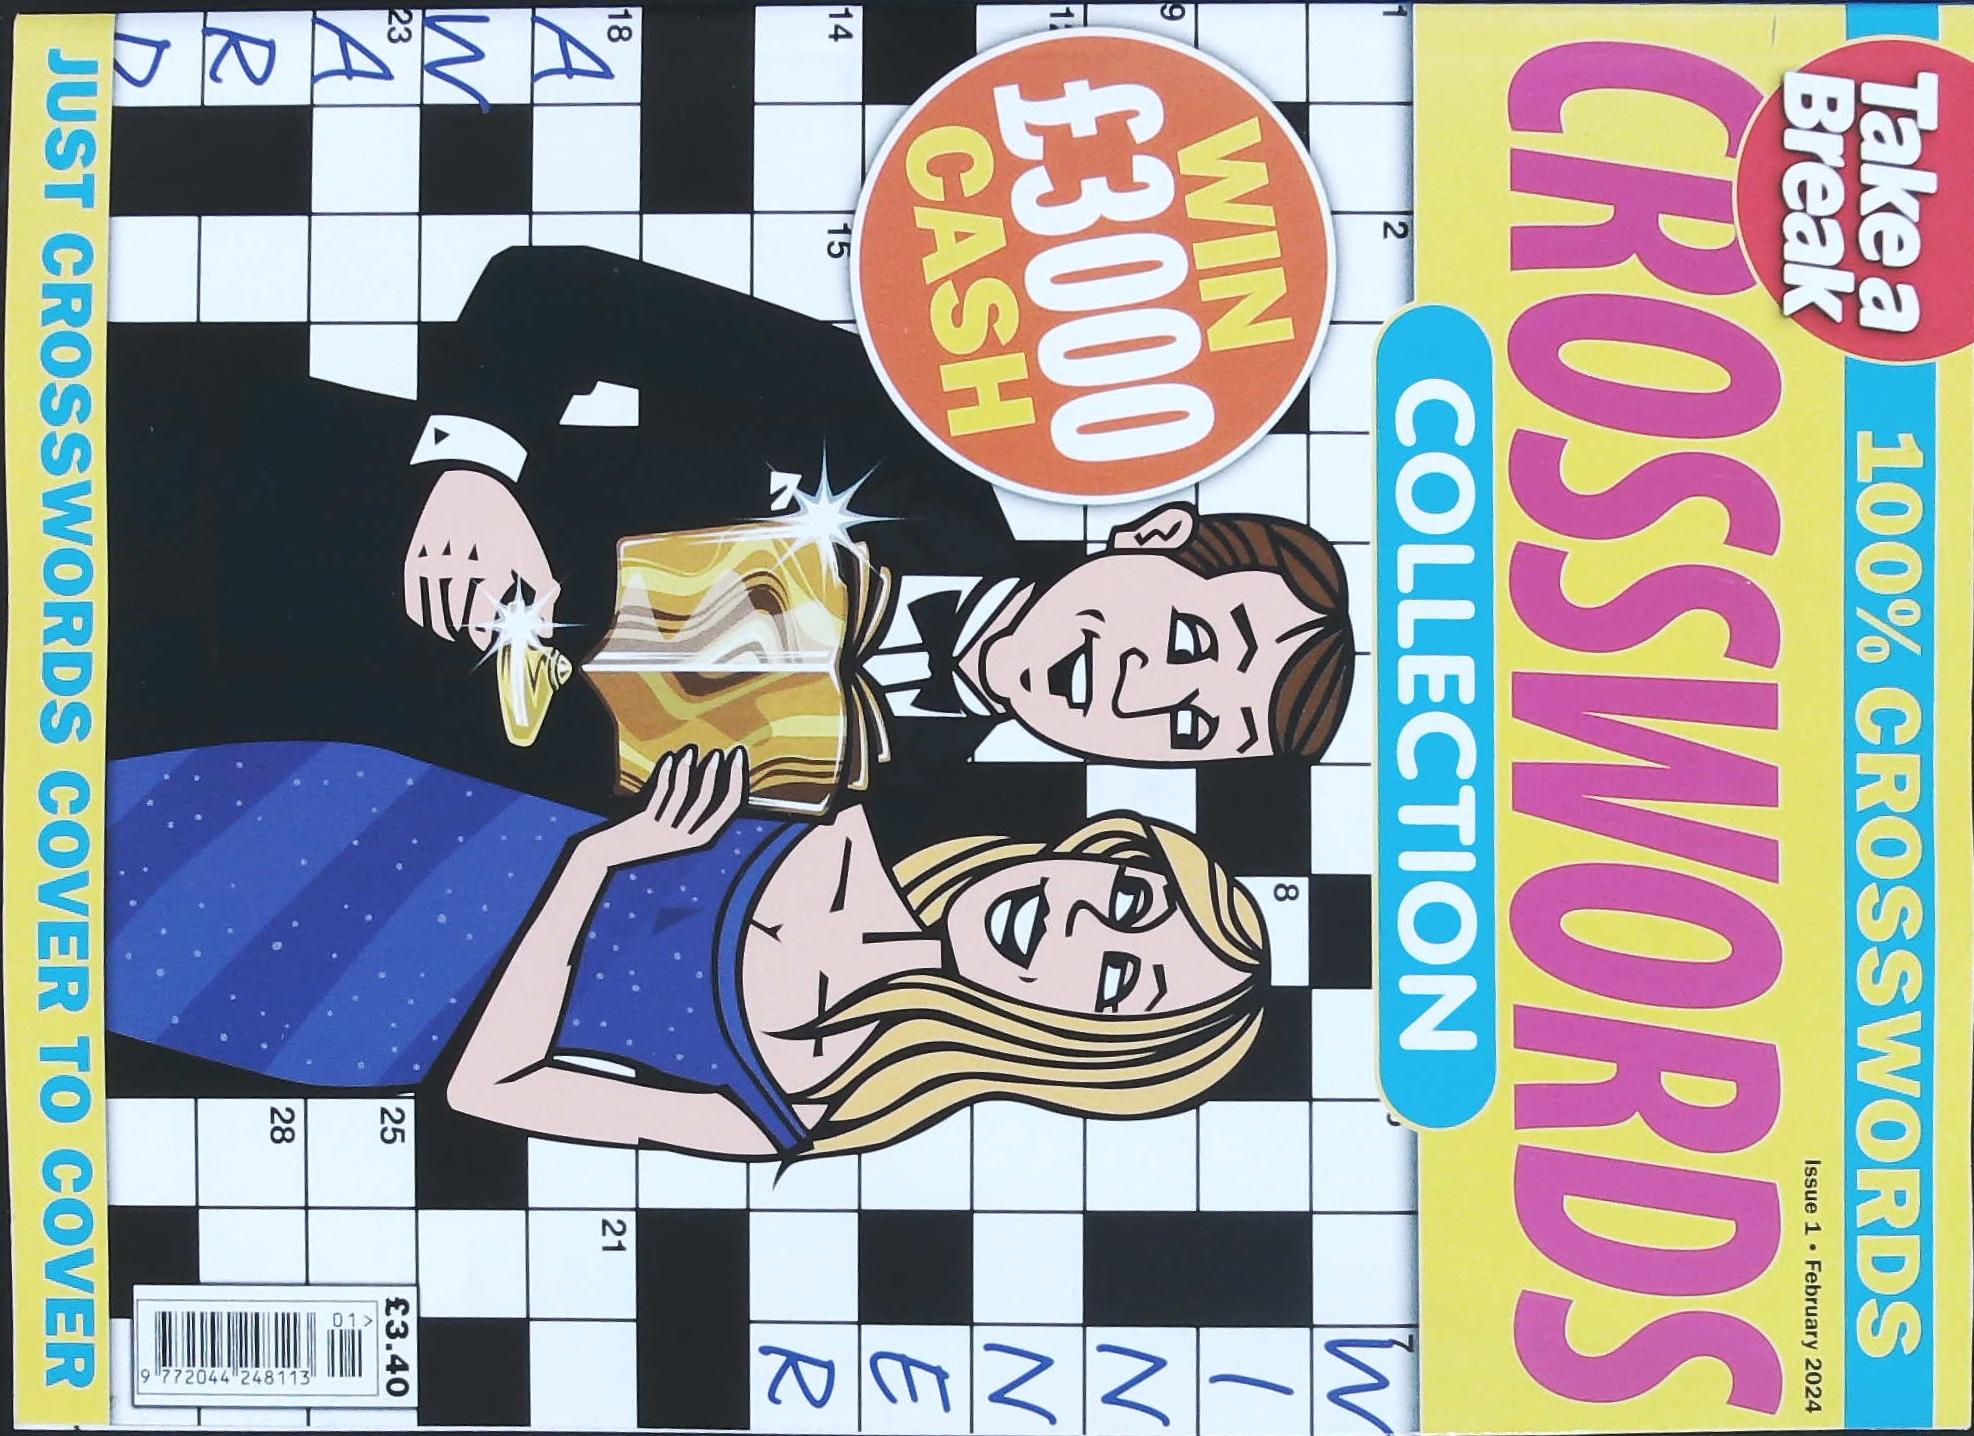 Buy TAB CROSSWORD COLLECTION from Magazine Supermarket